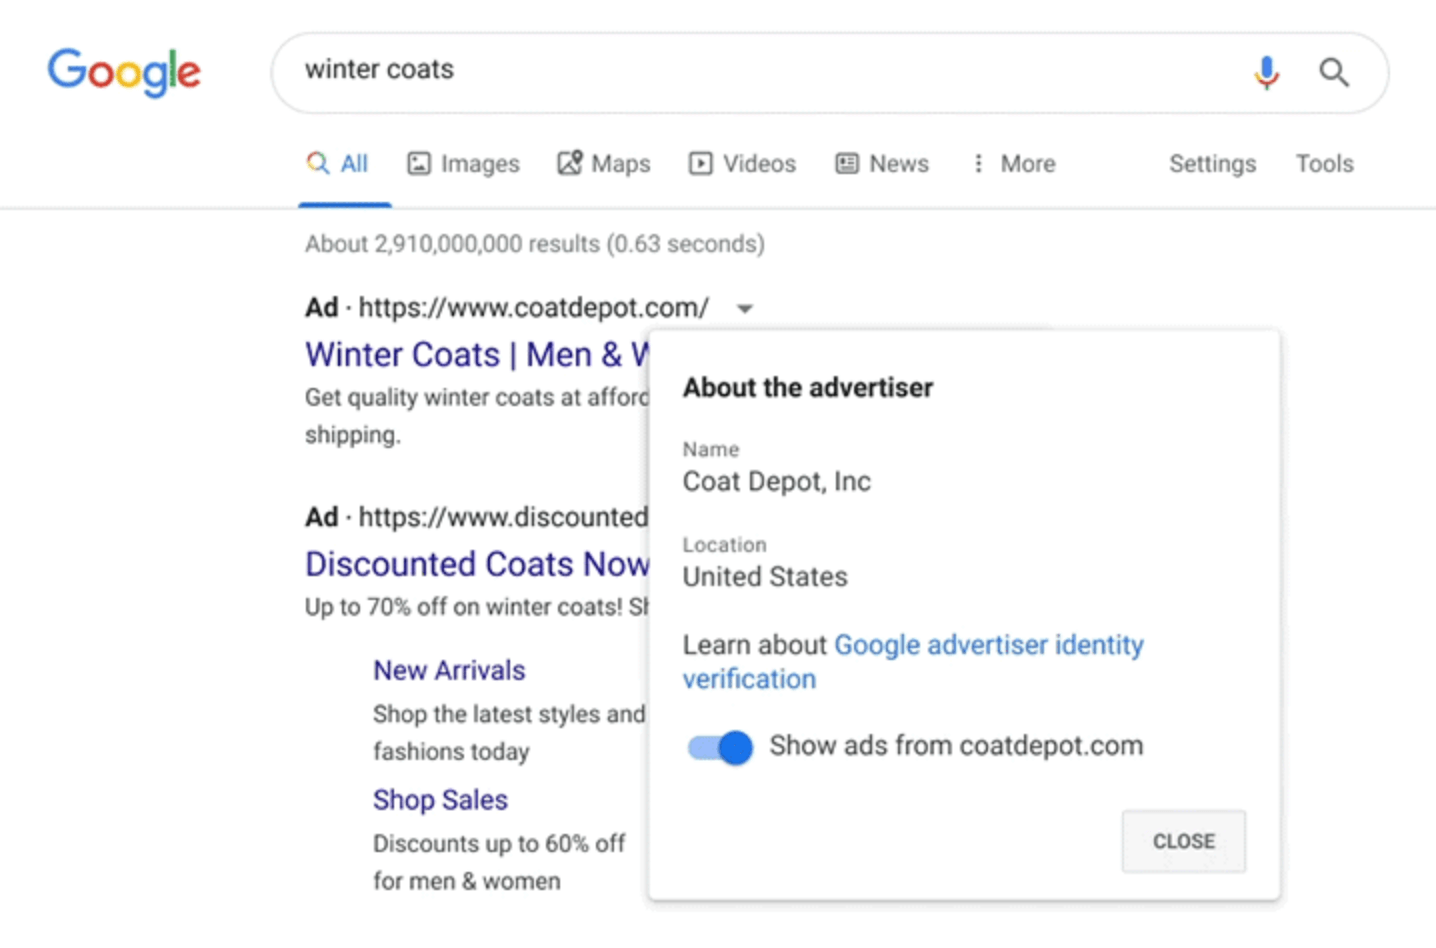 Google Ads - about the advertiser